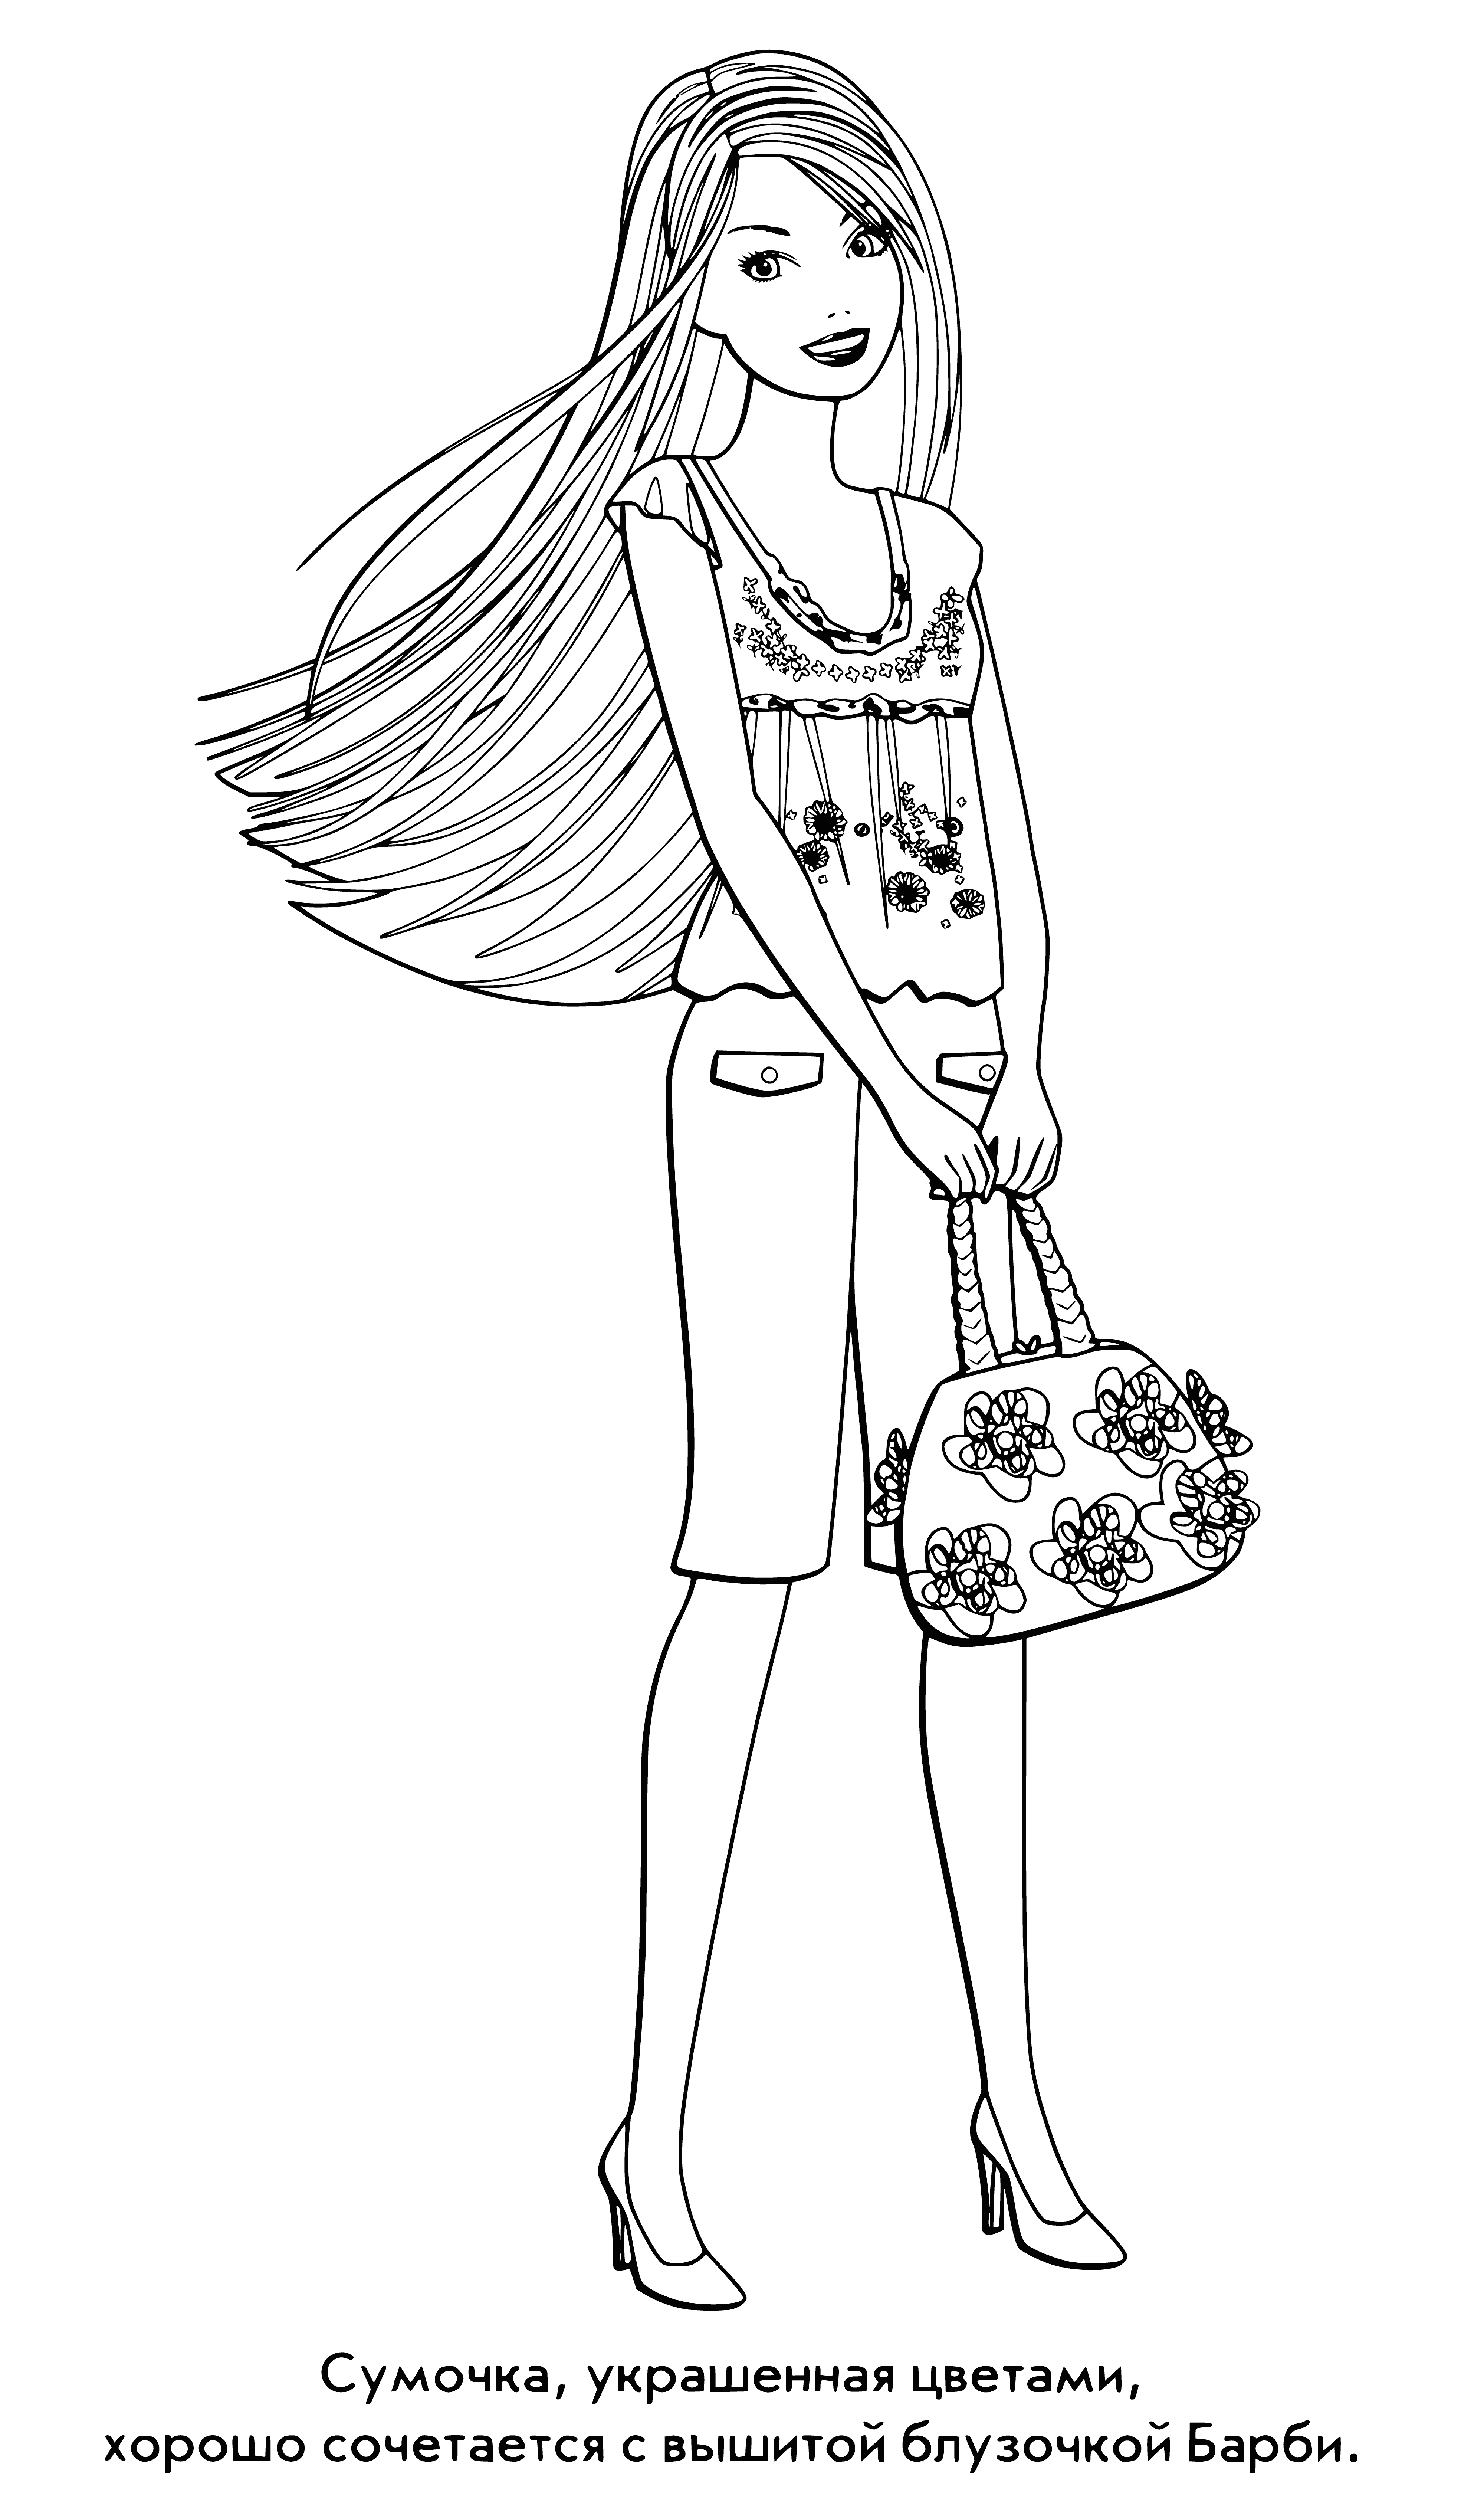 coloring page: Barbie doll with long, blonde hair, blue eyes, wearing a pink dress & matching shoes featured in coloring page. #Barbie #coloring